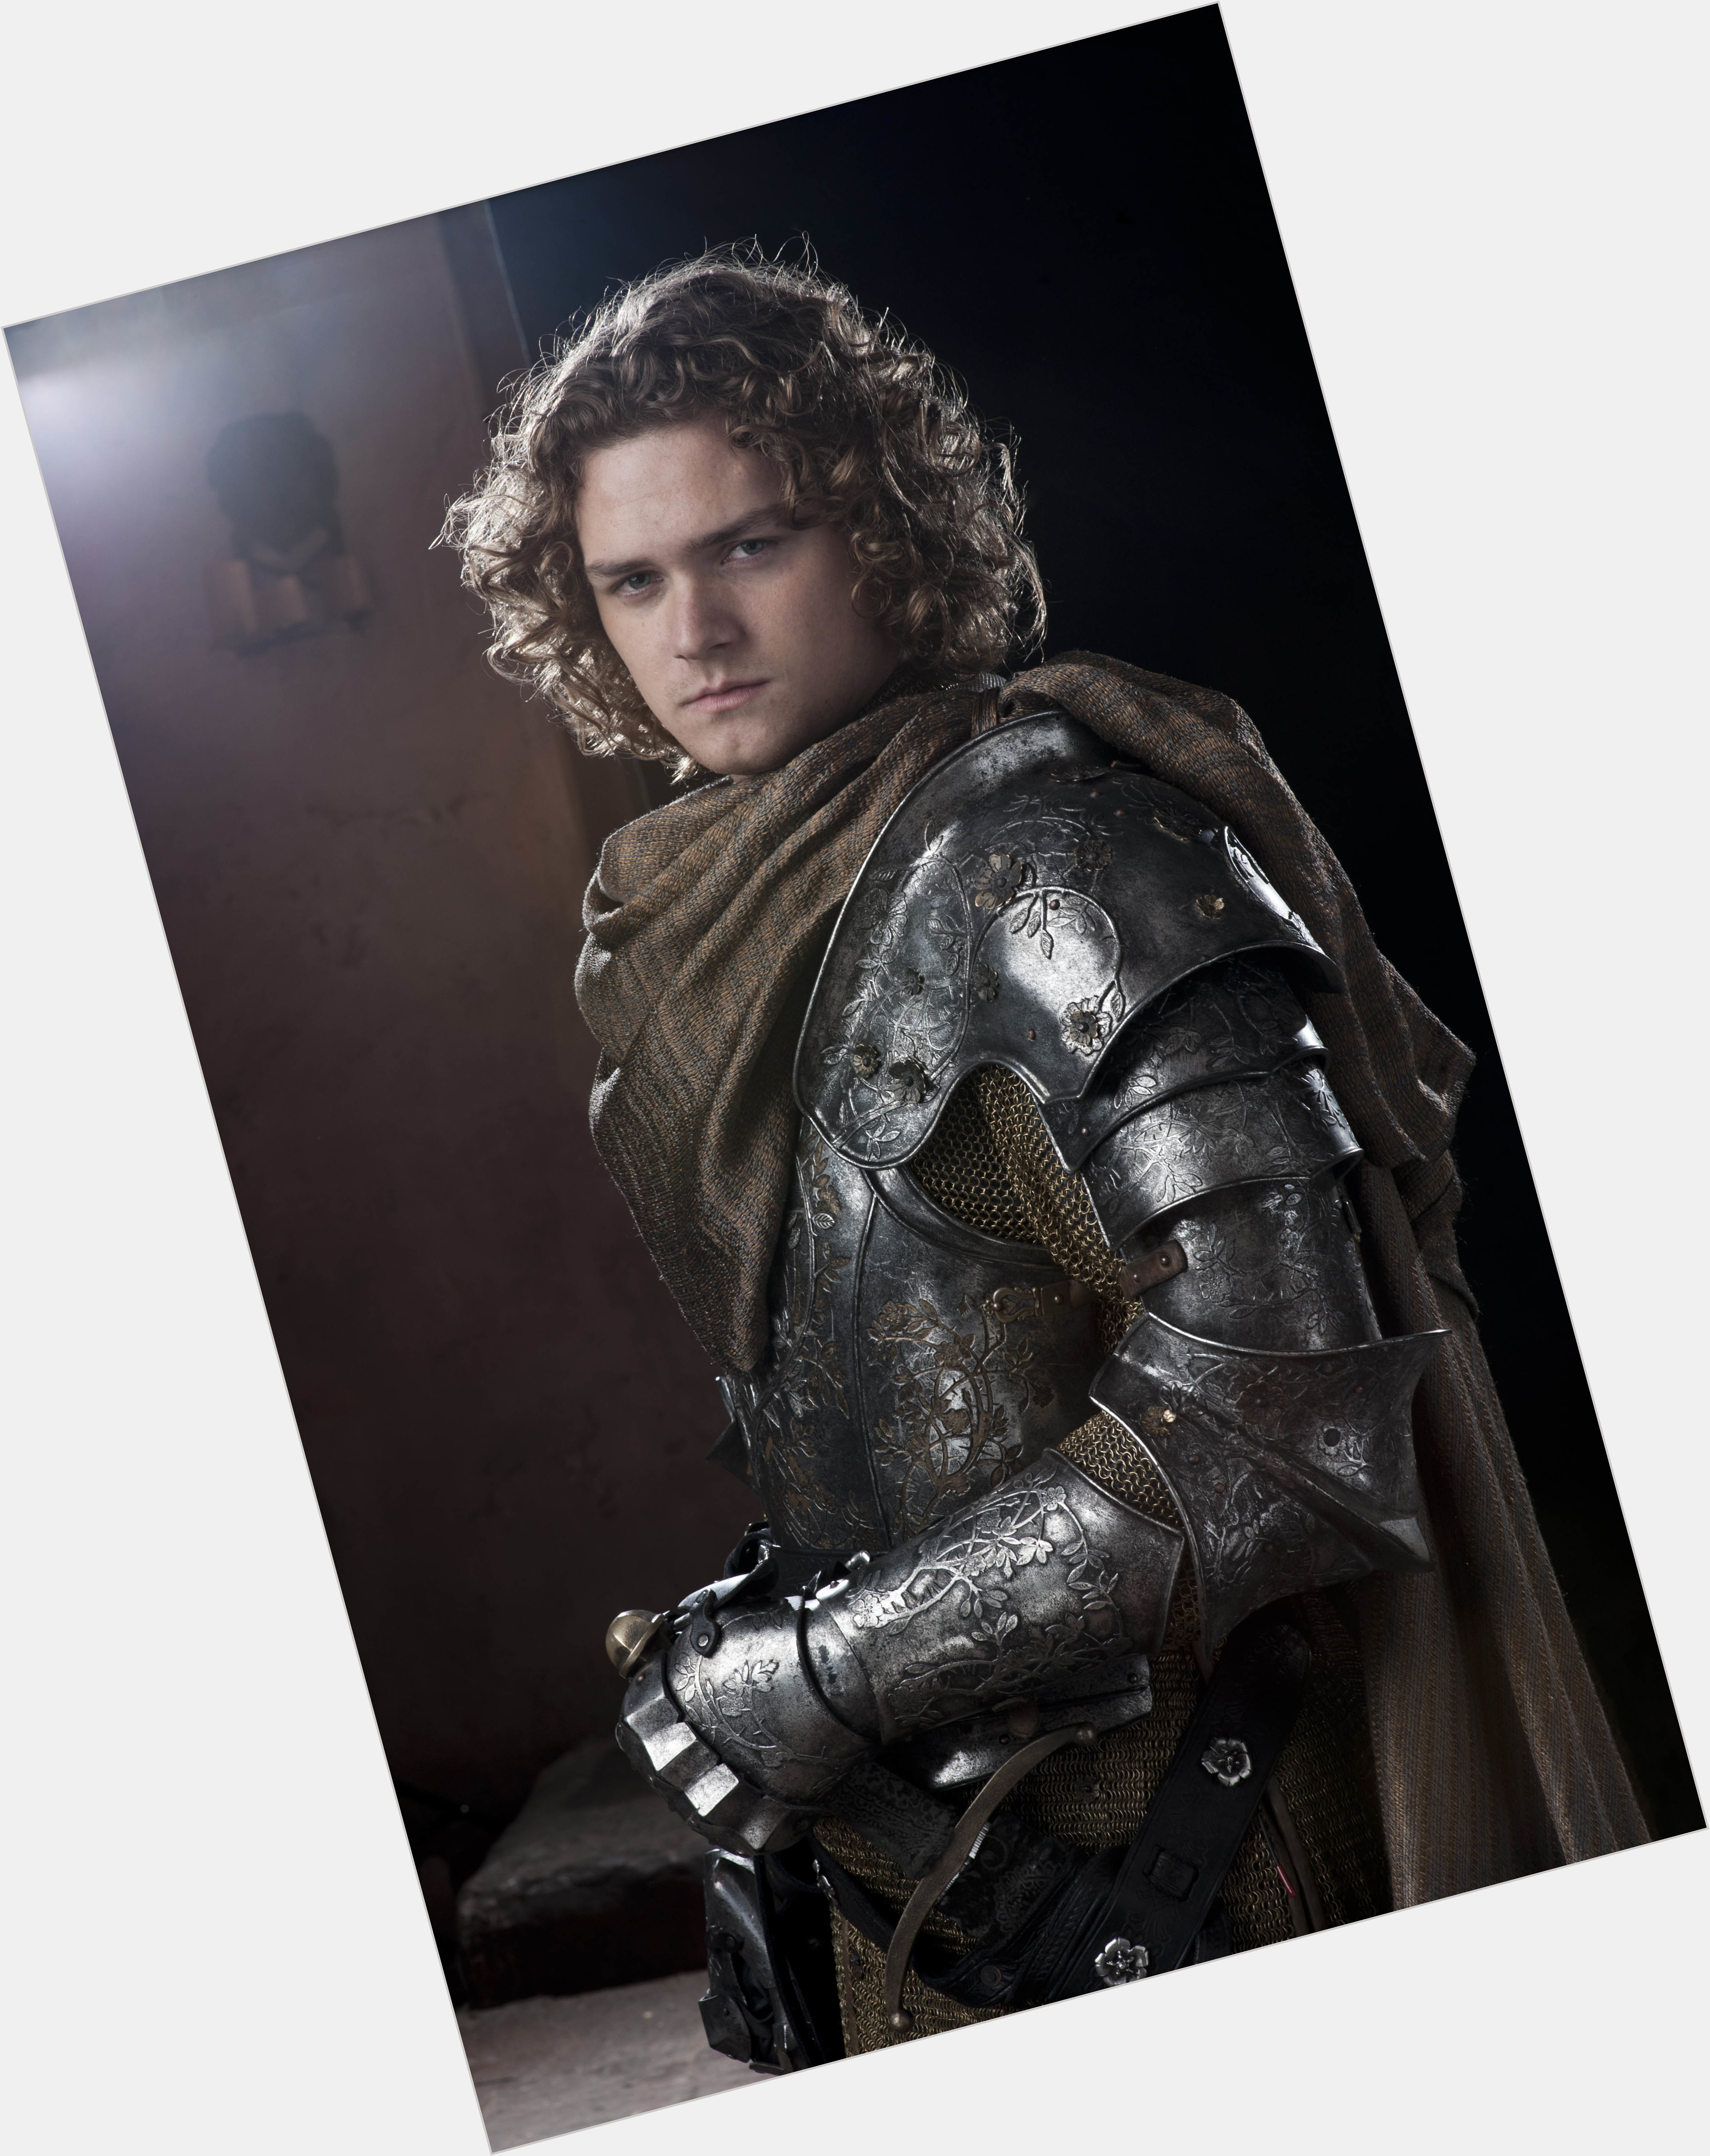 Loras Tyrell Athletic body,  light brown hair & hairstyles